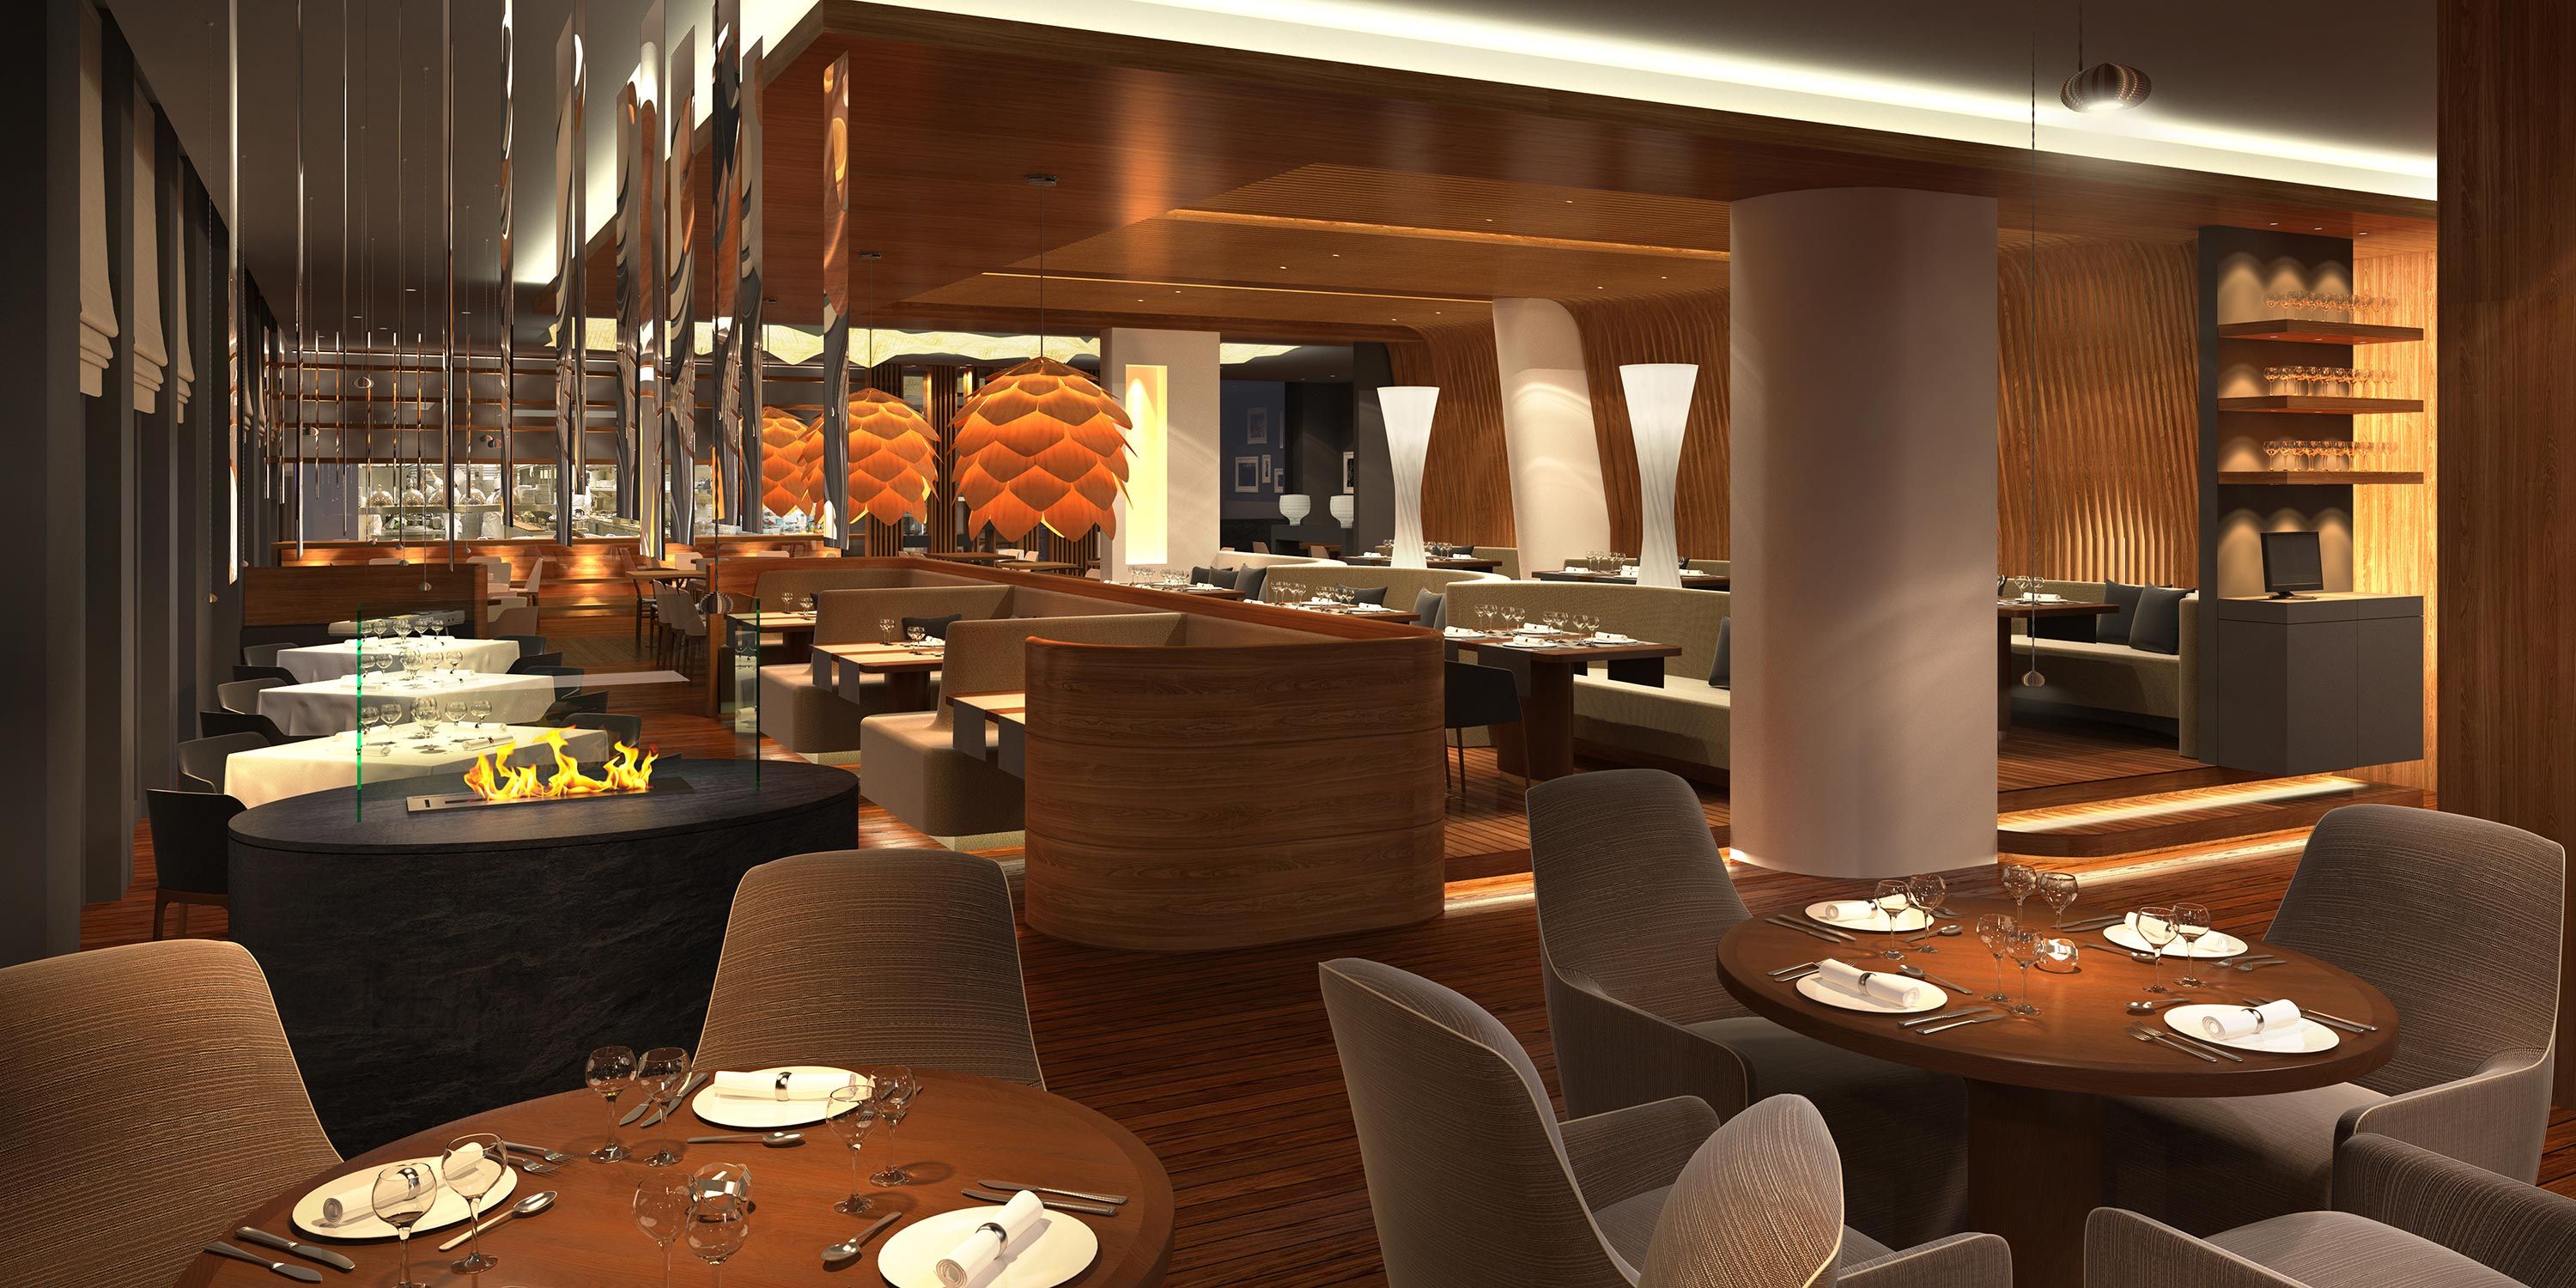 Formal Restaurant in wood and orange colors